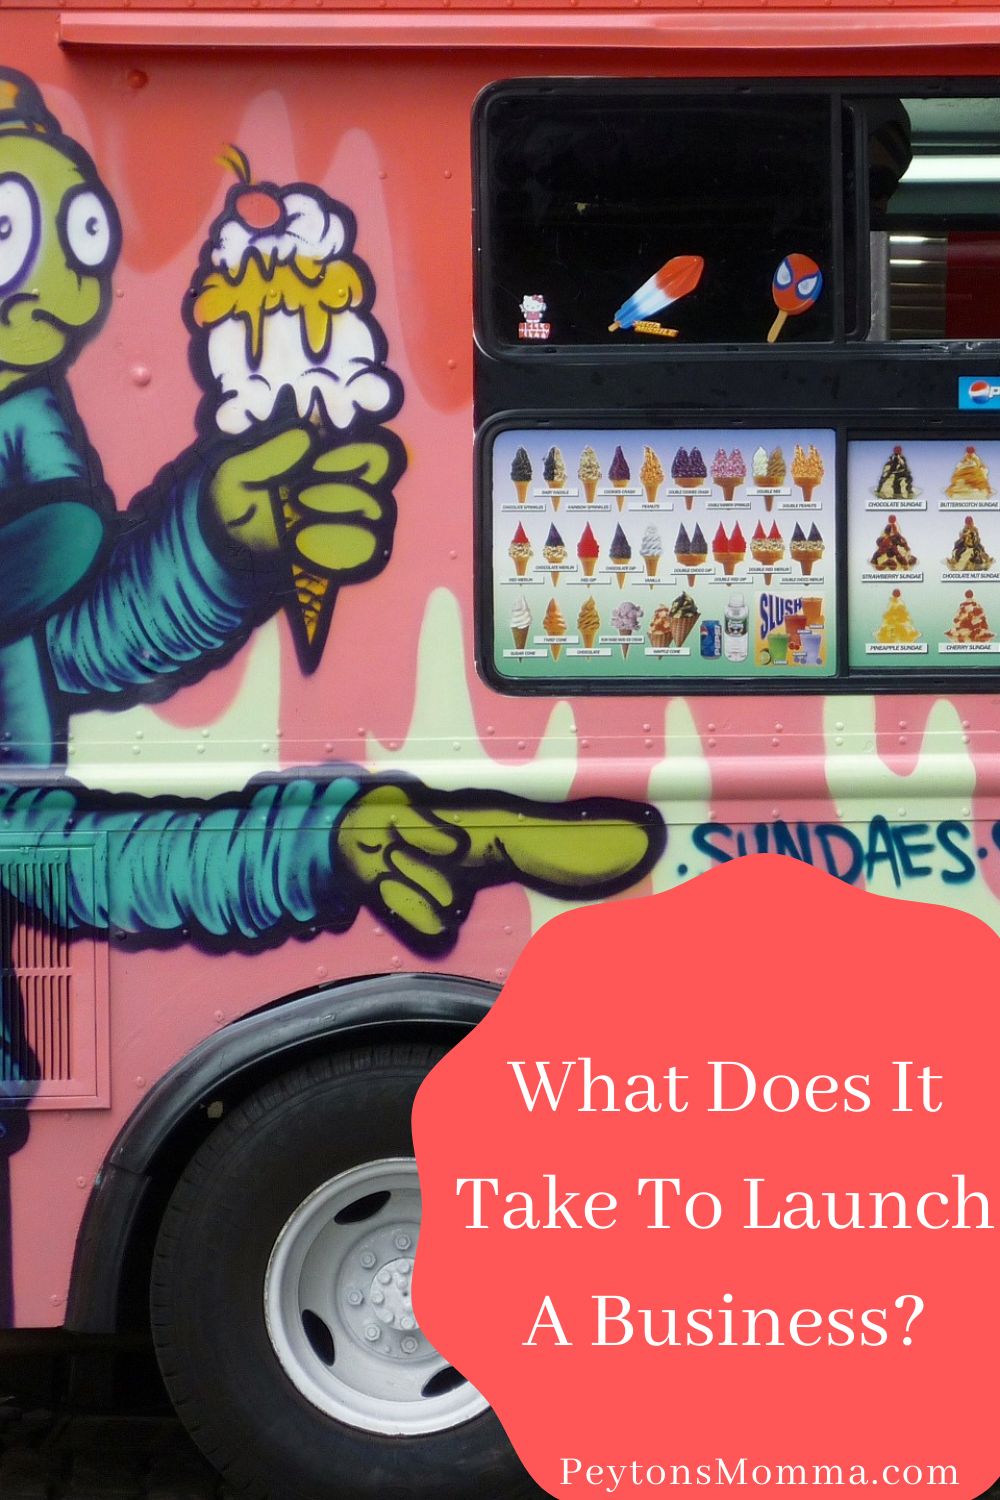 What Does It Take To Launch A Business? - Peyton's Momma™